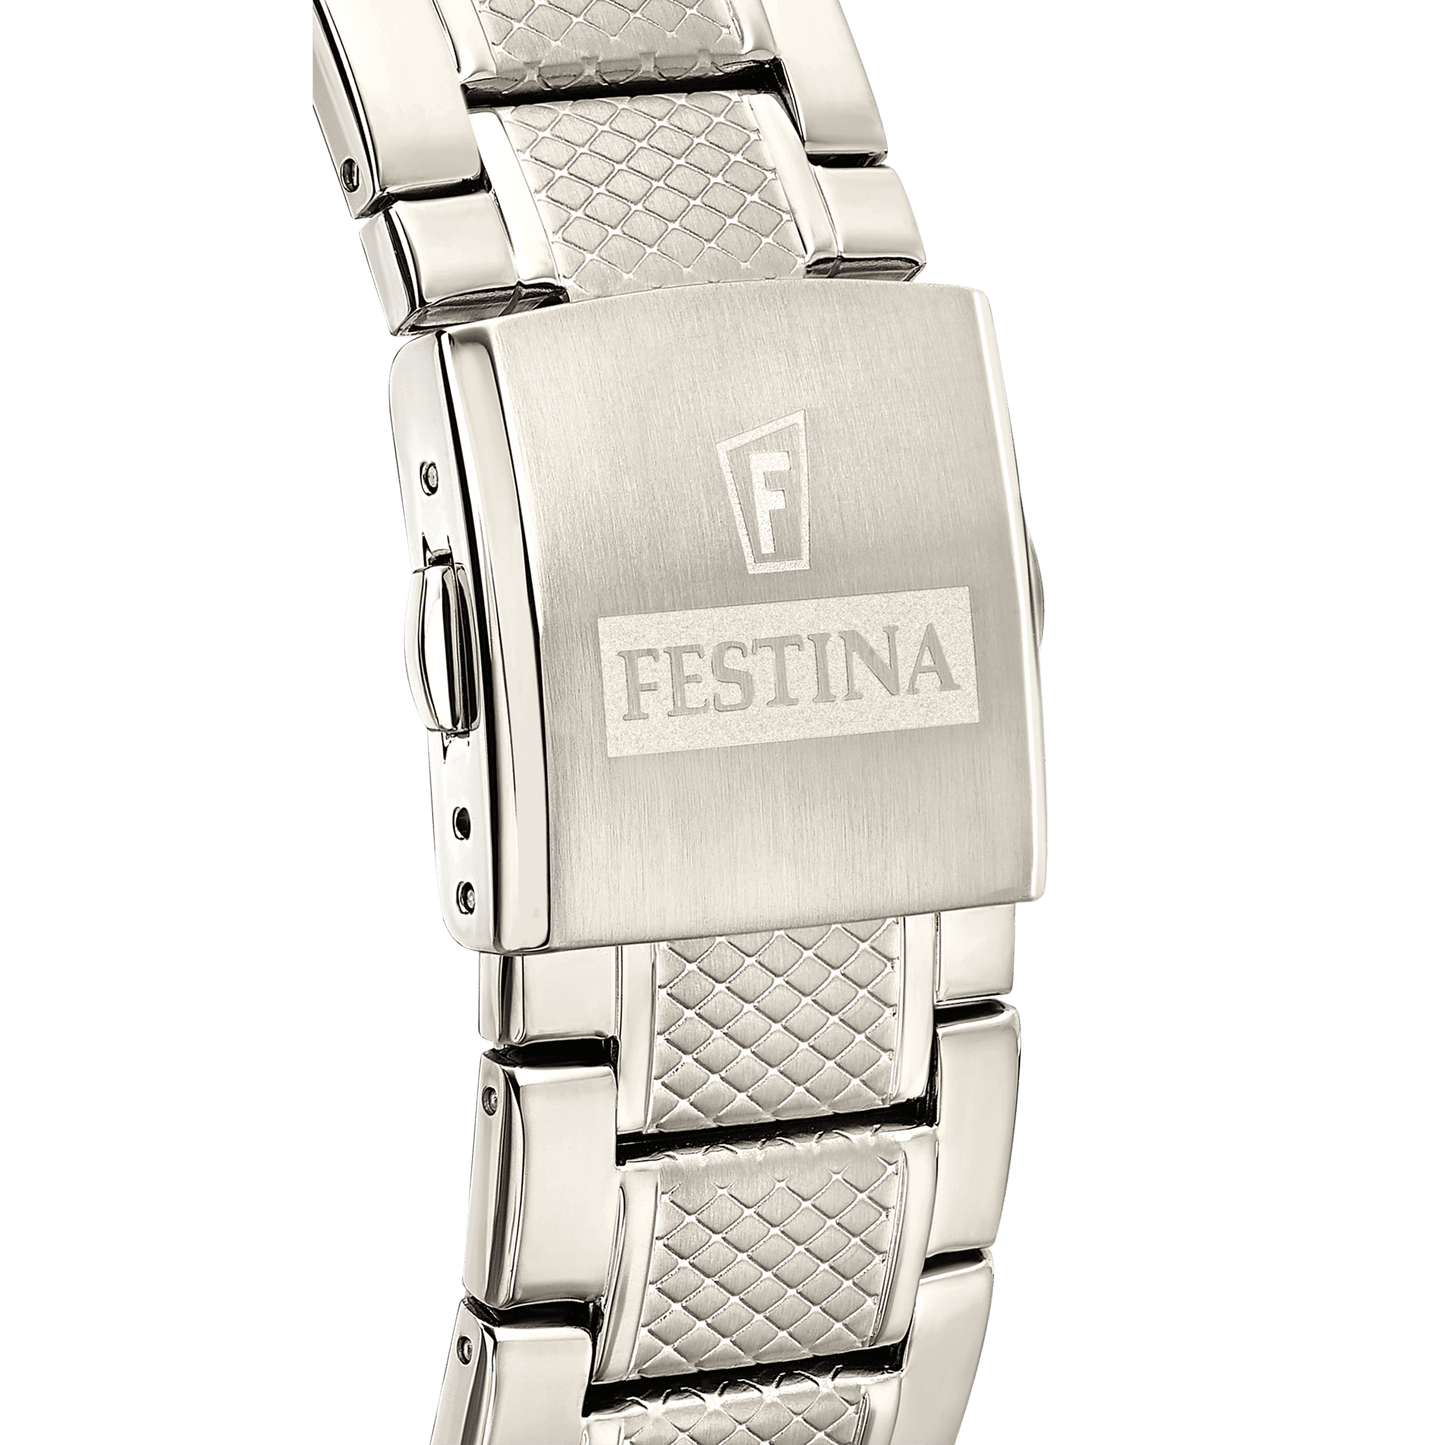 Chrono Sport F20439-5 | Water Resistance 100m/330ft - Strap Material Stainless Steel - Size 44 mm / Free shipping, 2 years warranty & 30 Days Return | Festina Watches USA